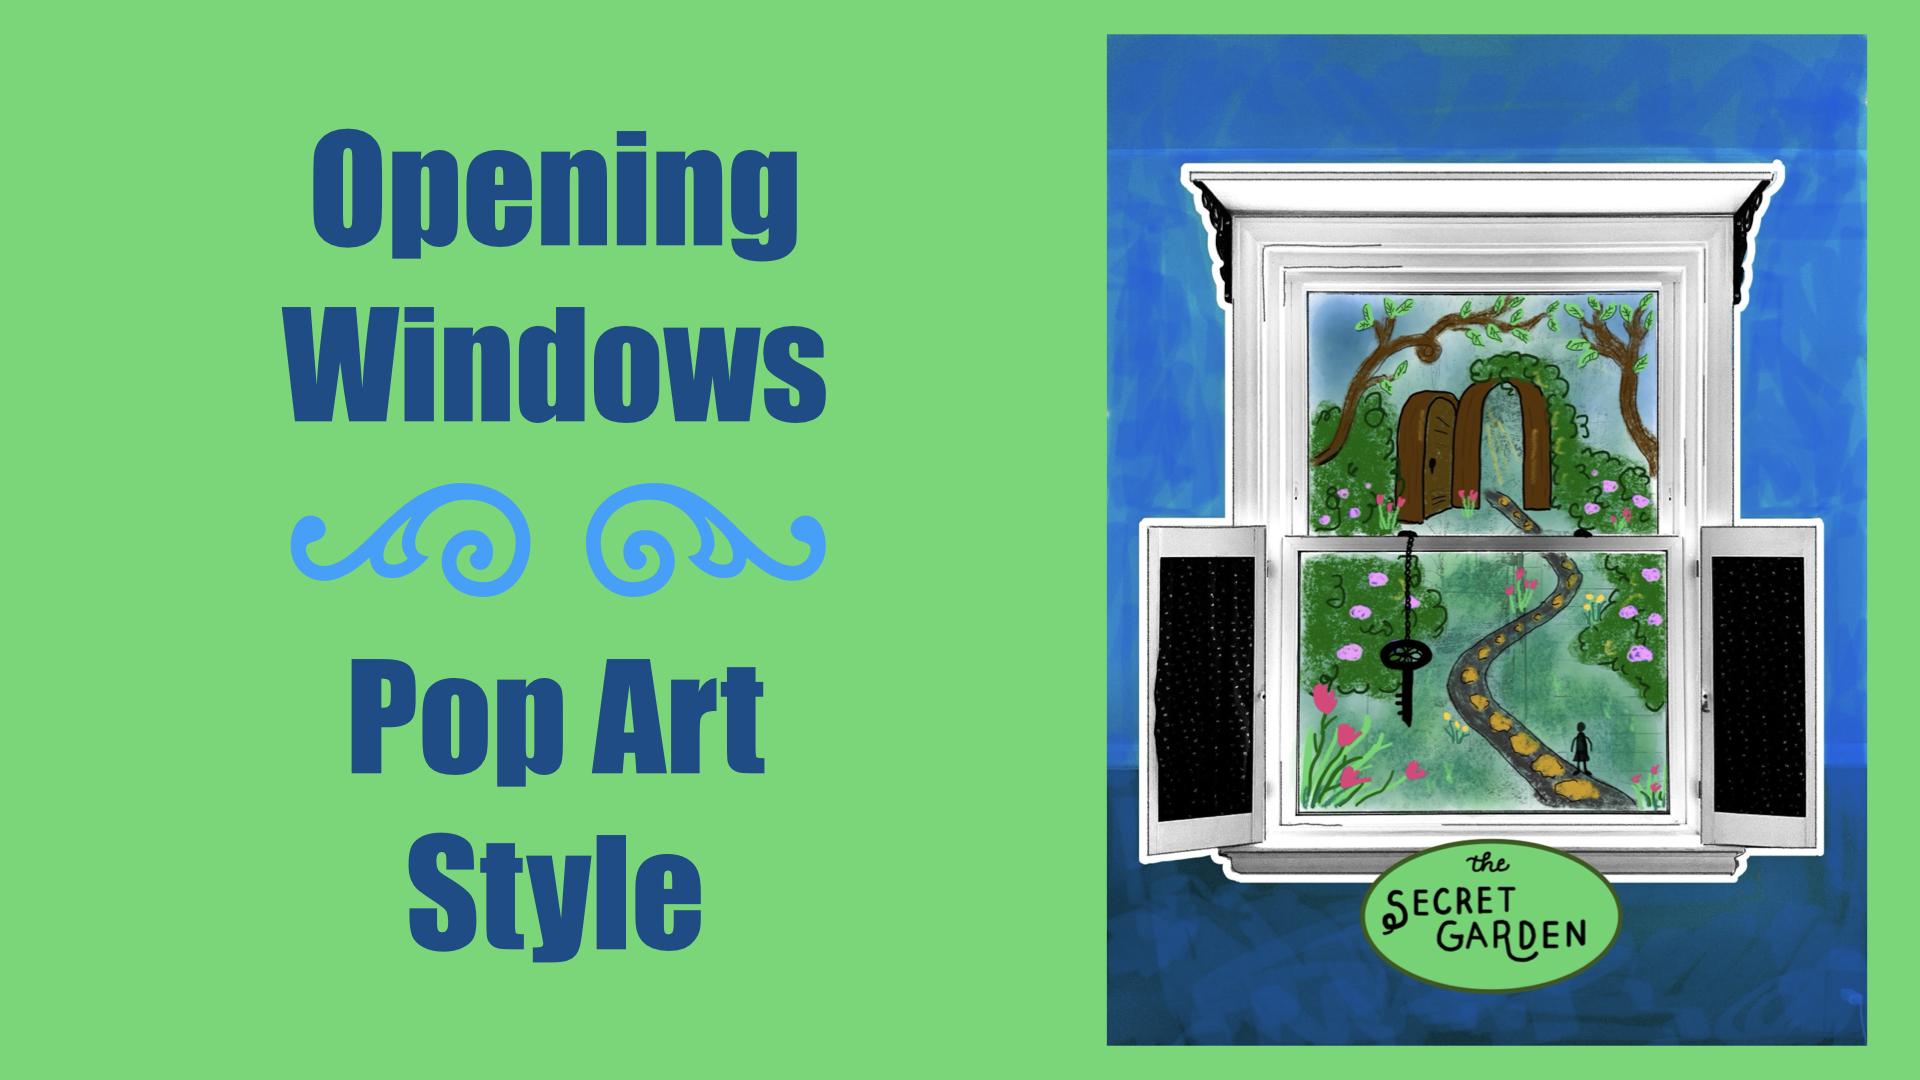 "Opening Windows - Pop Art Style" title graphic with a window looking out into the Secret Garden.